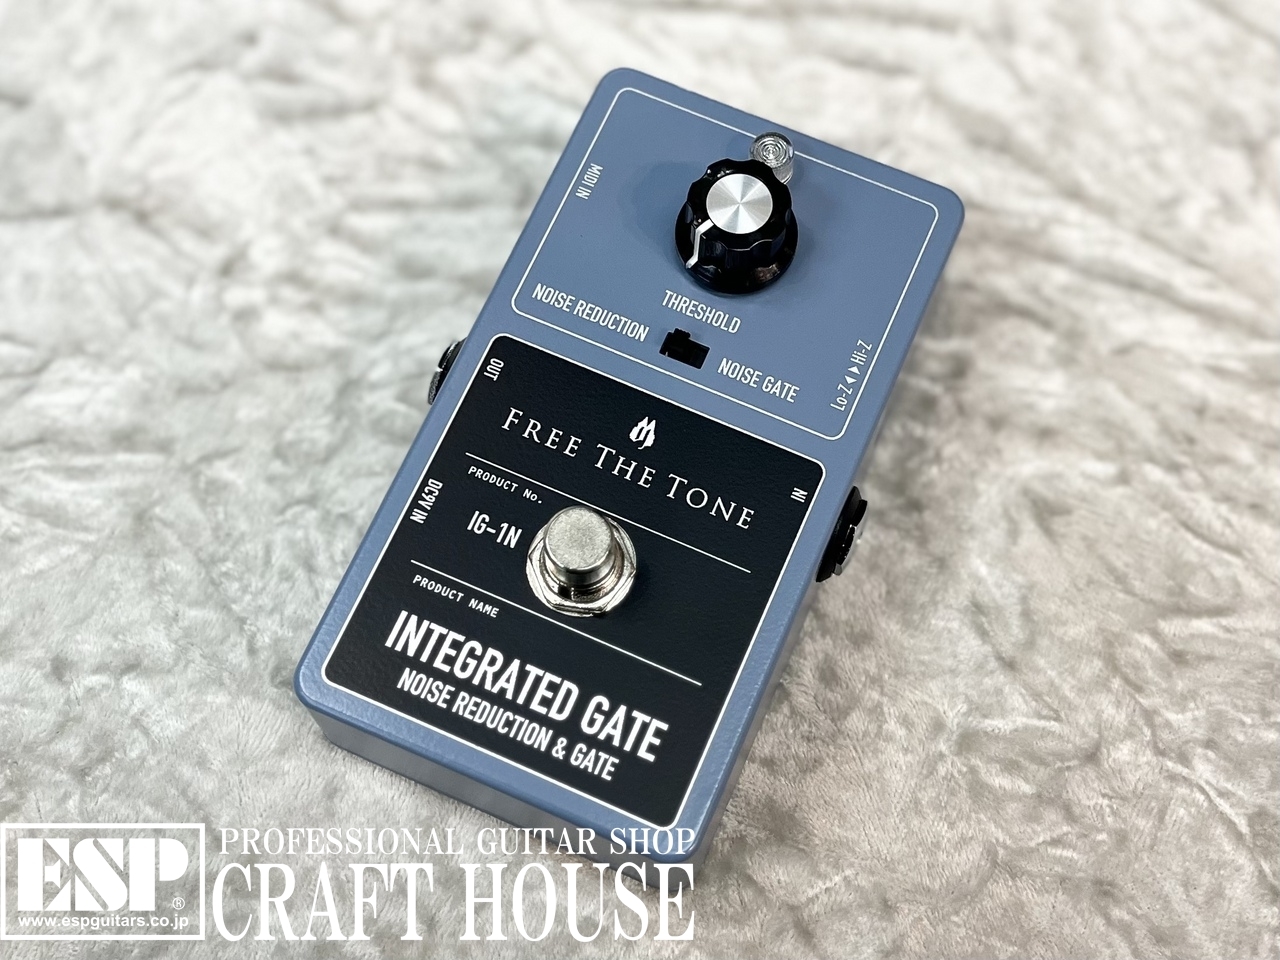 Free The Tone INTEGRATED GATE / IGN NOISE REDUCTION & GATE新品